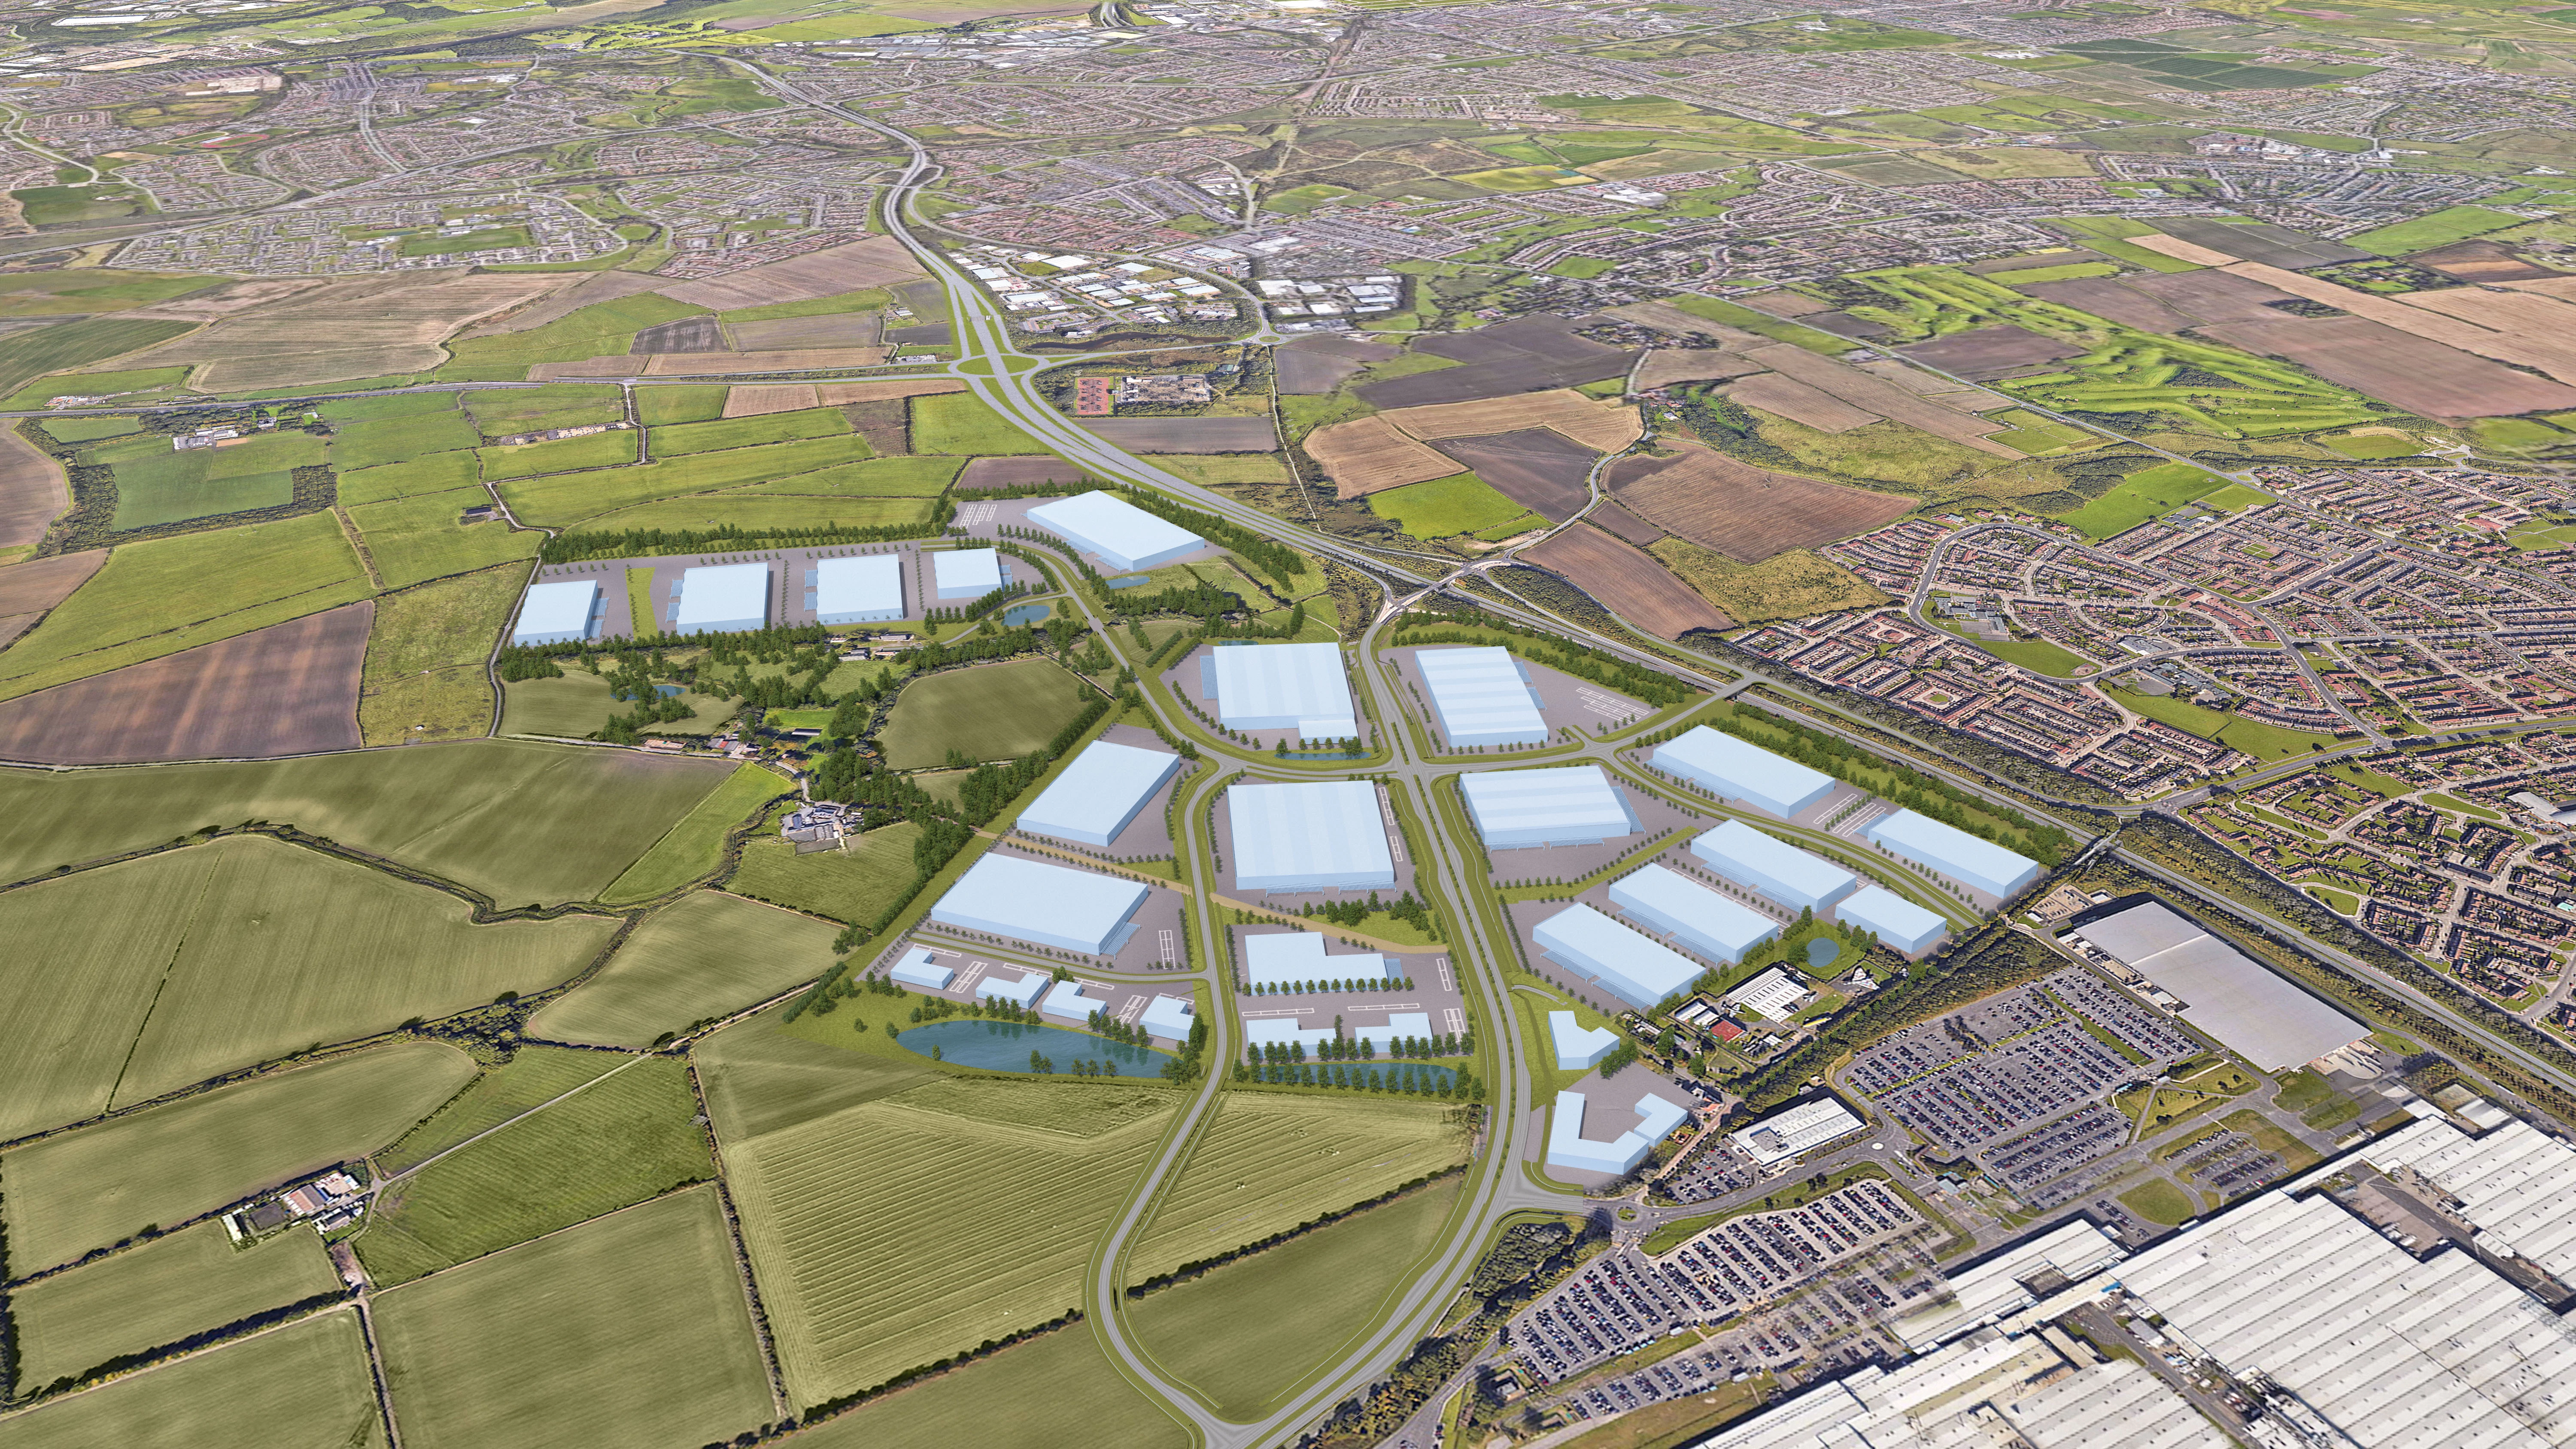 IAMP is proposed for an area close to the A19 and to the north of Nissan’s existing manufacturing plant.